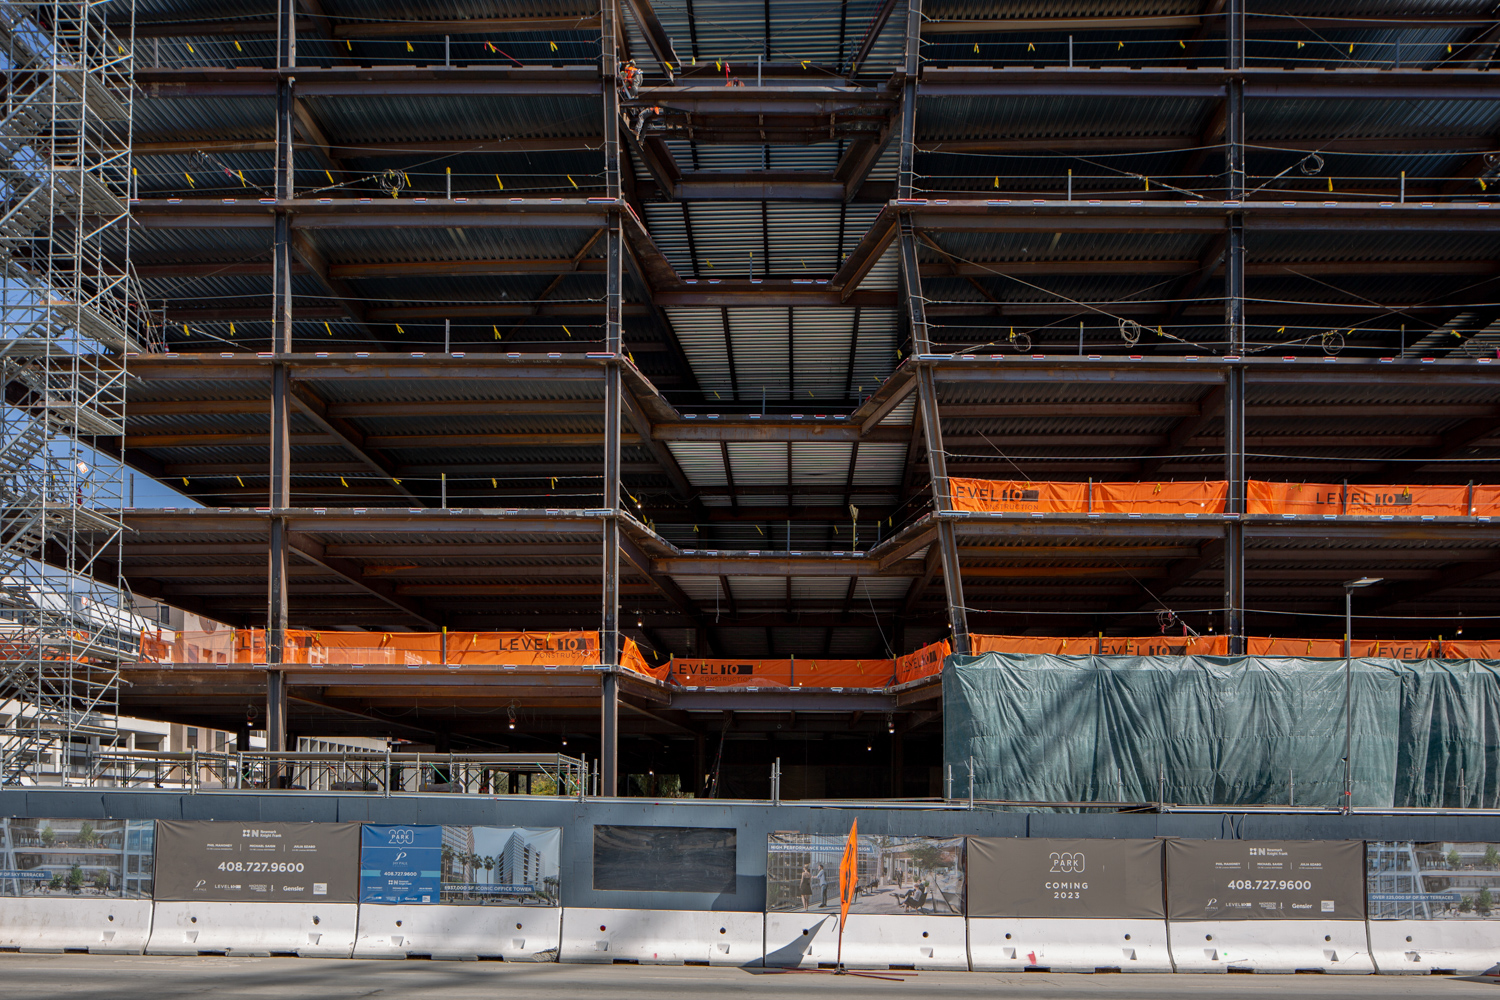 200 Park Avenue solar carving close-up, construction update, image by Andrew Campbell Nelson